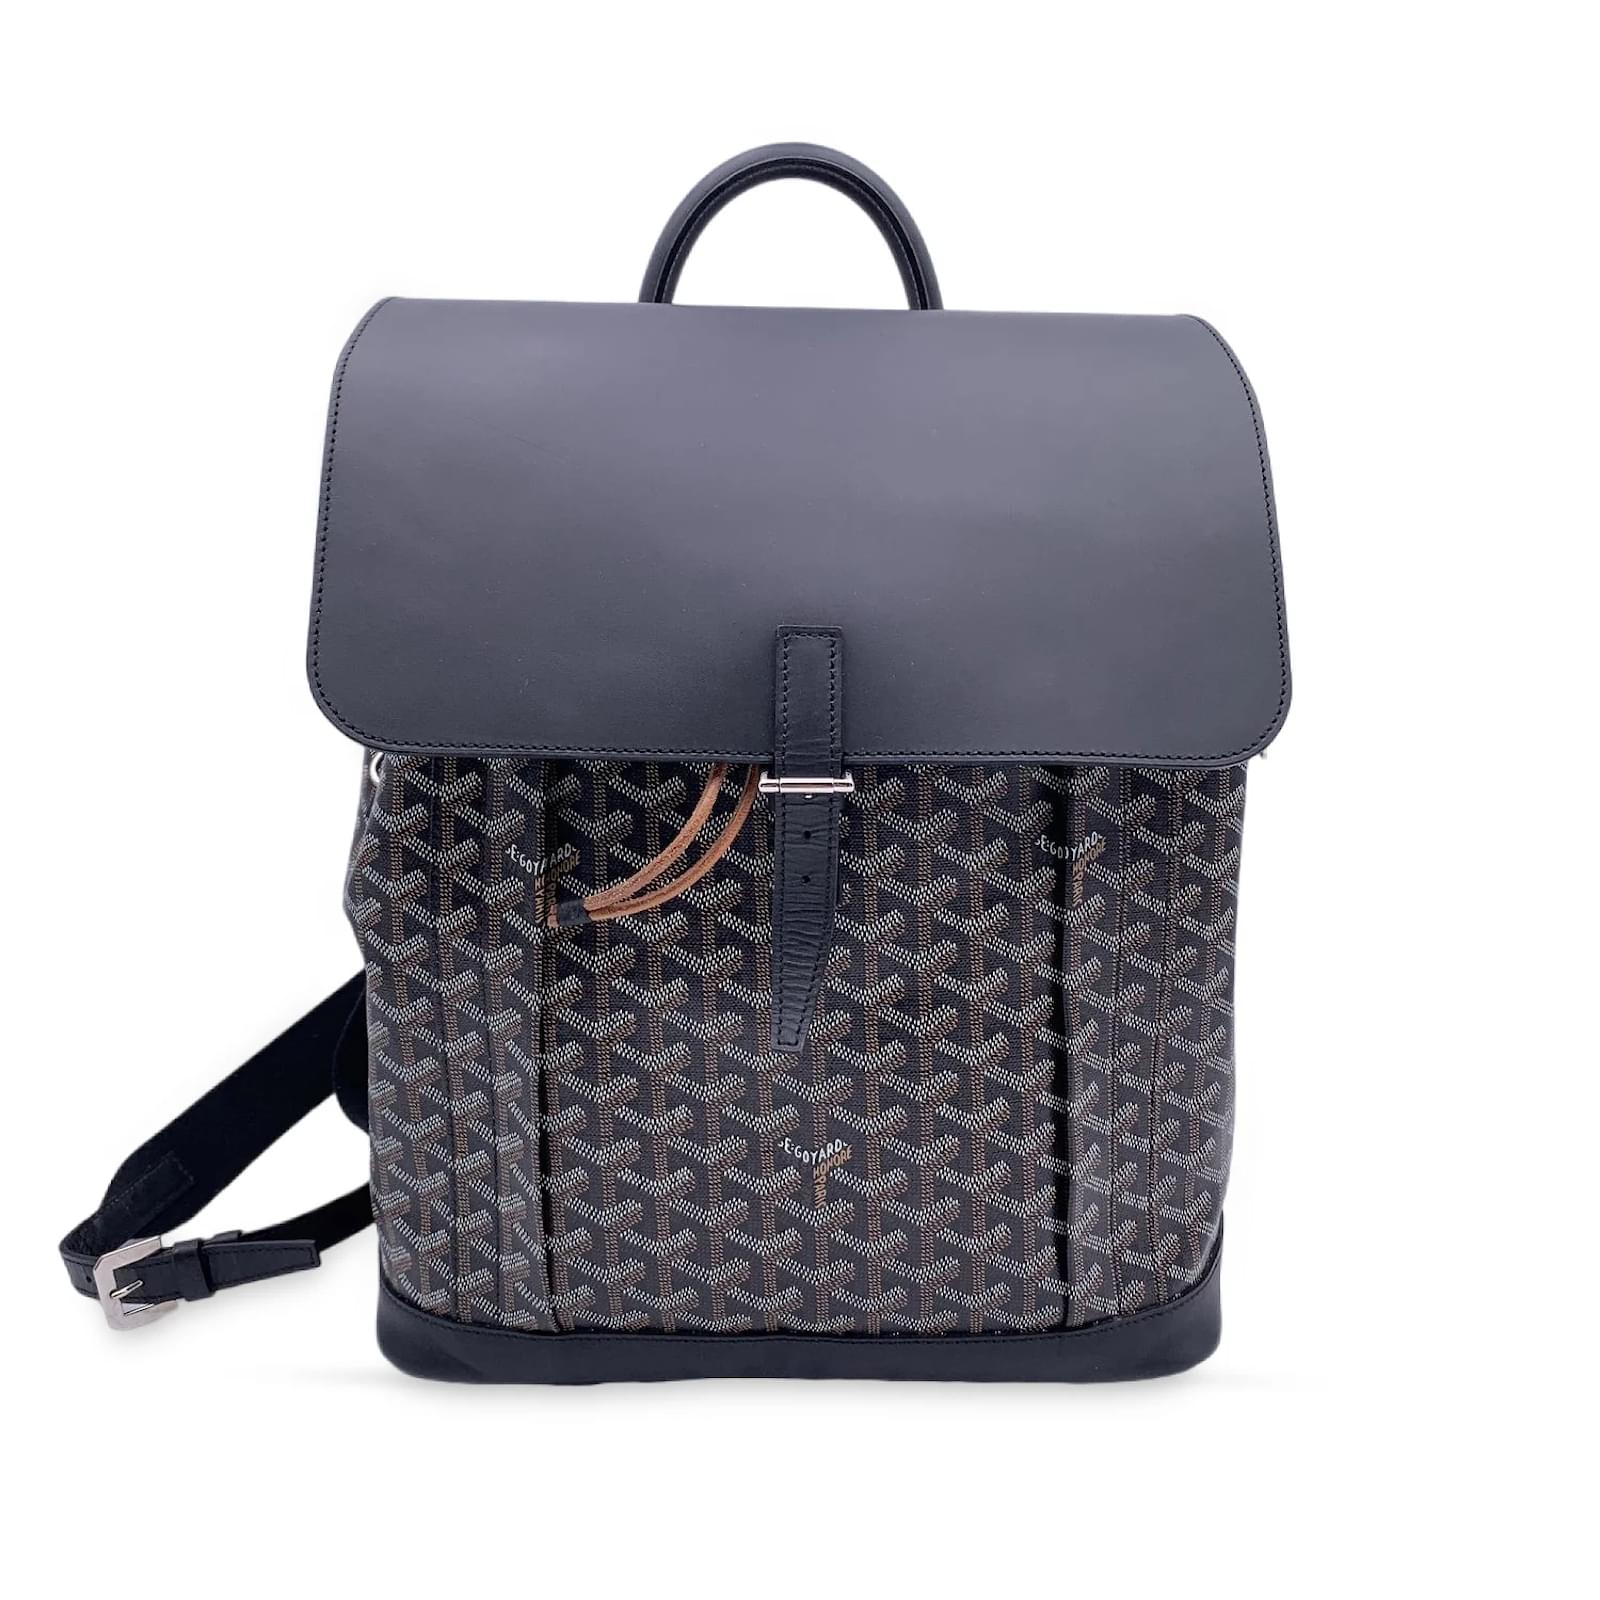 Goyard Alpin Backpack GRAY BRAND NEW WITH RECEIPT- MM Full Size